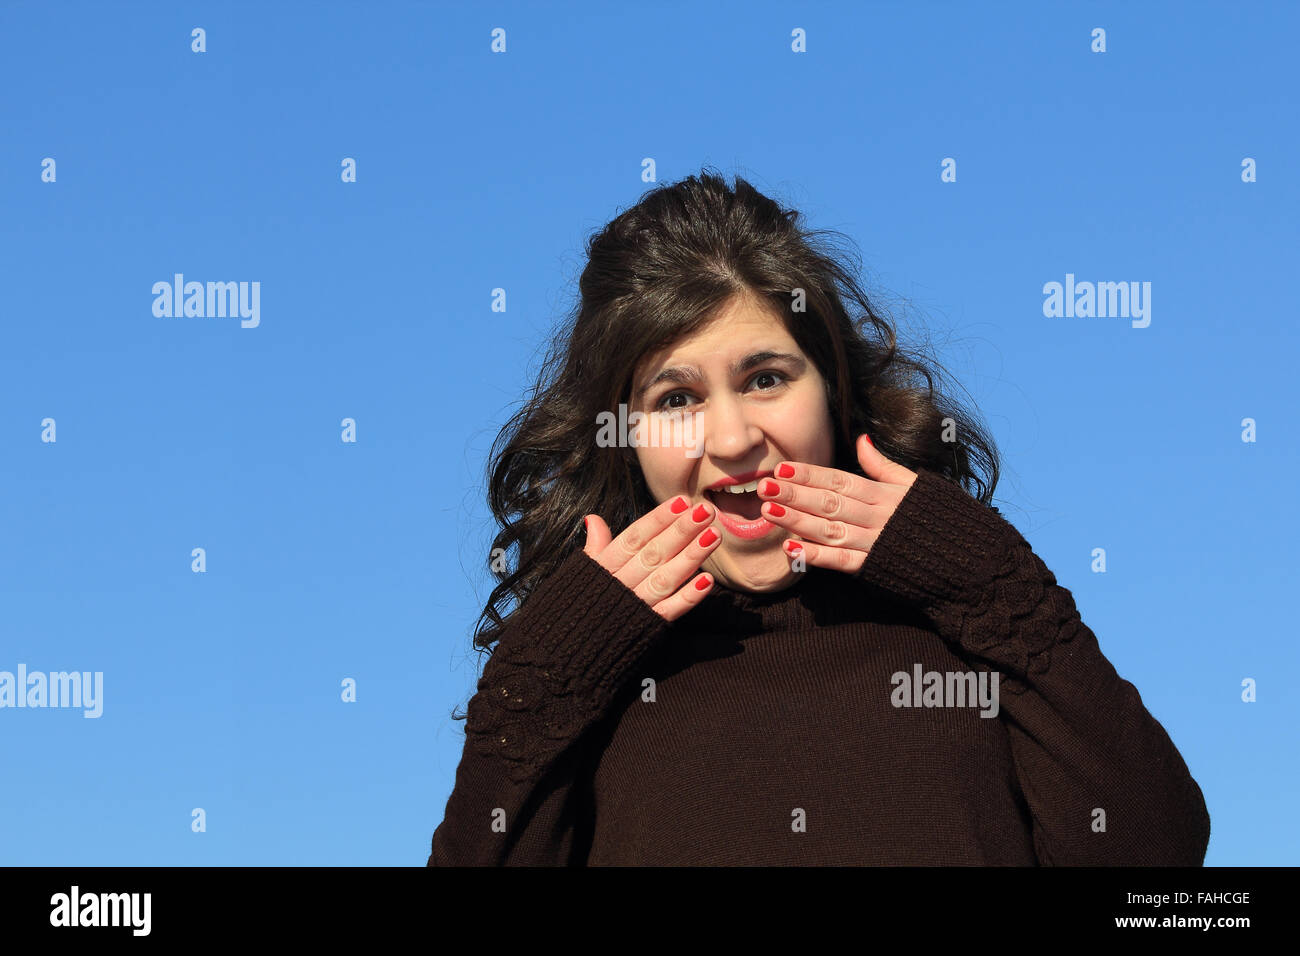 Girl with her hands over her mouth and eyes wide from shock. Stock Photo